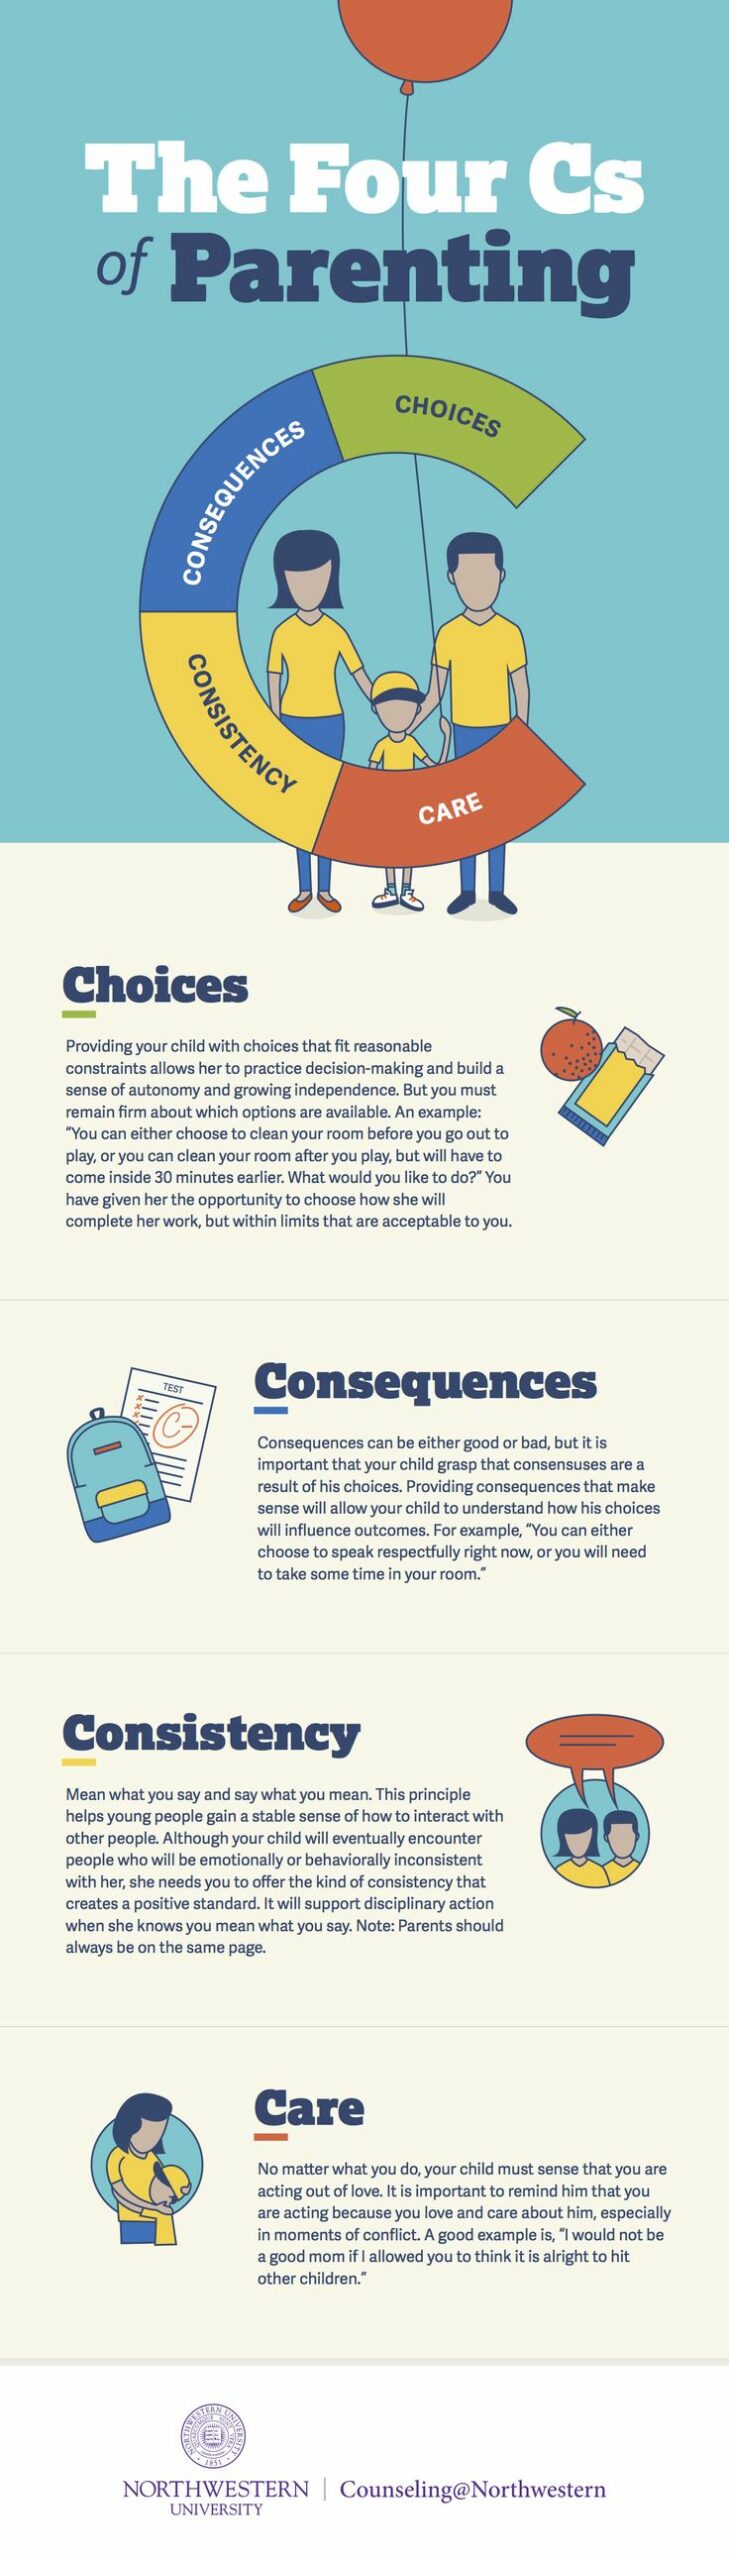 The Four Cs of Parenting (infographic)